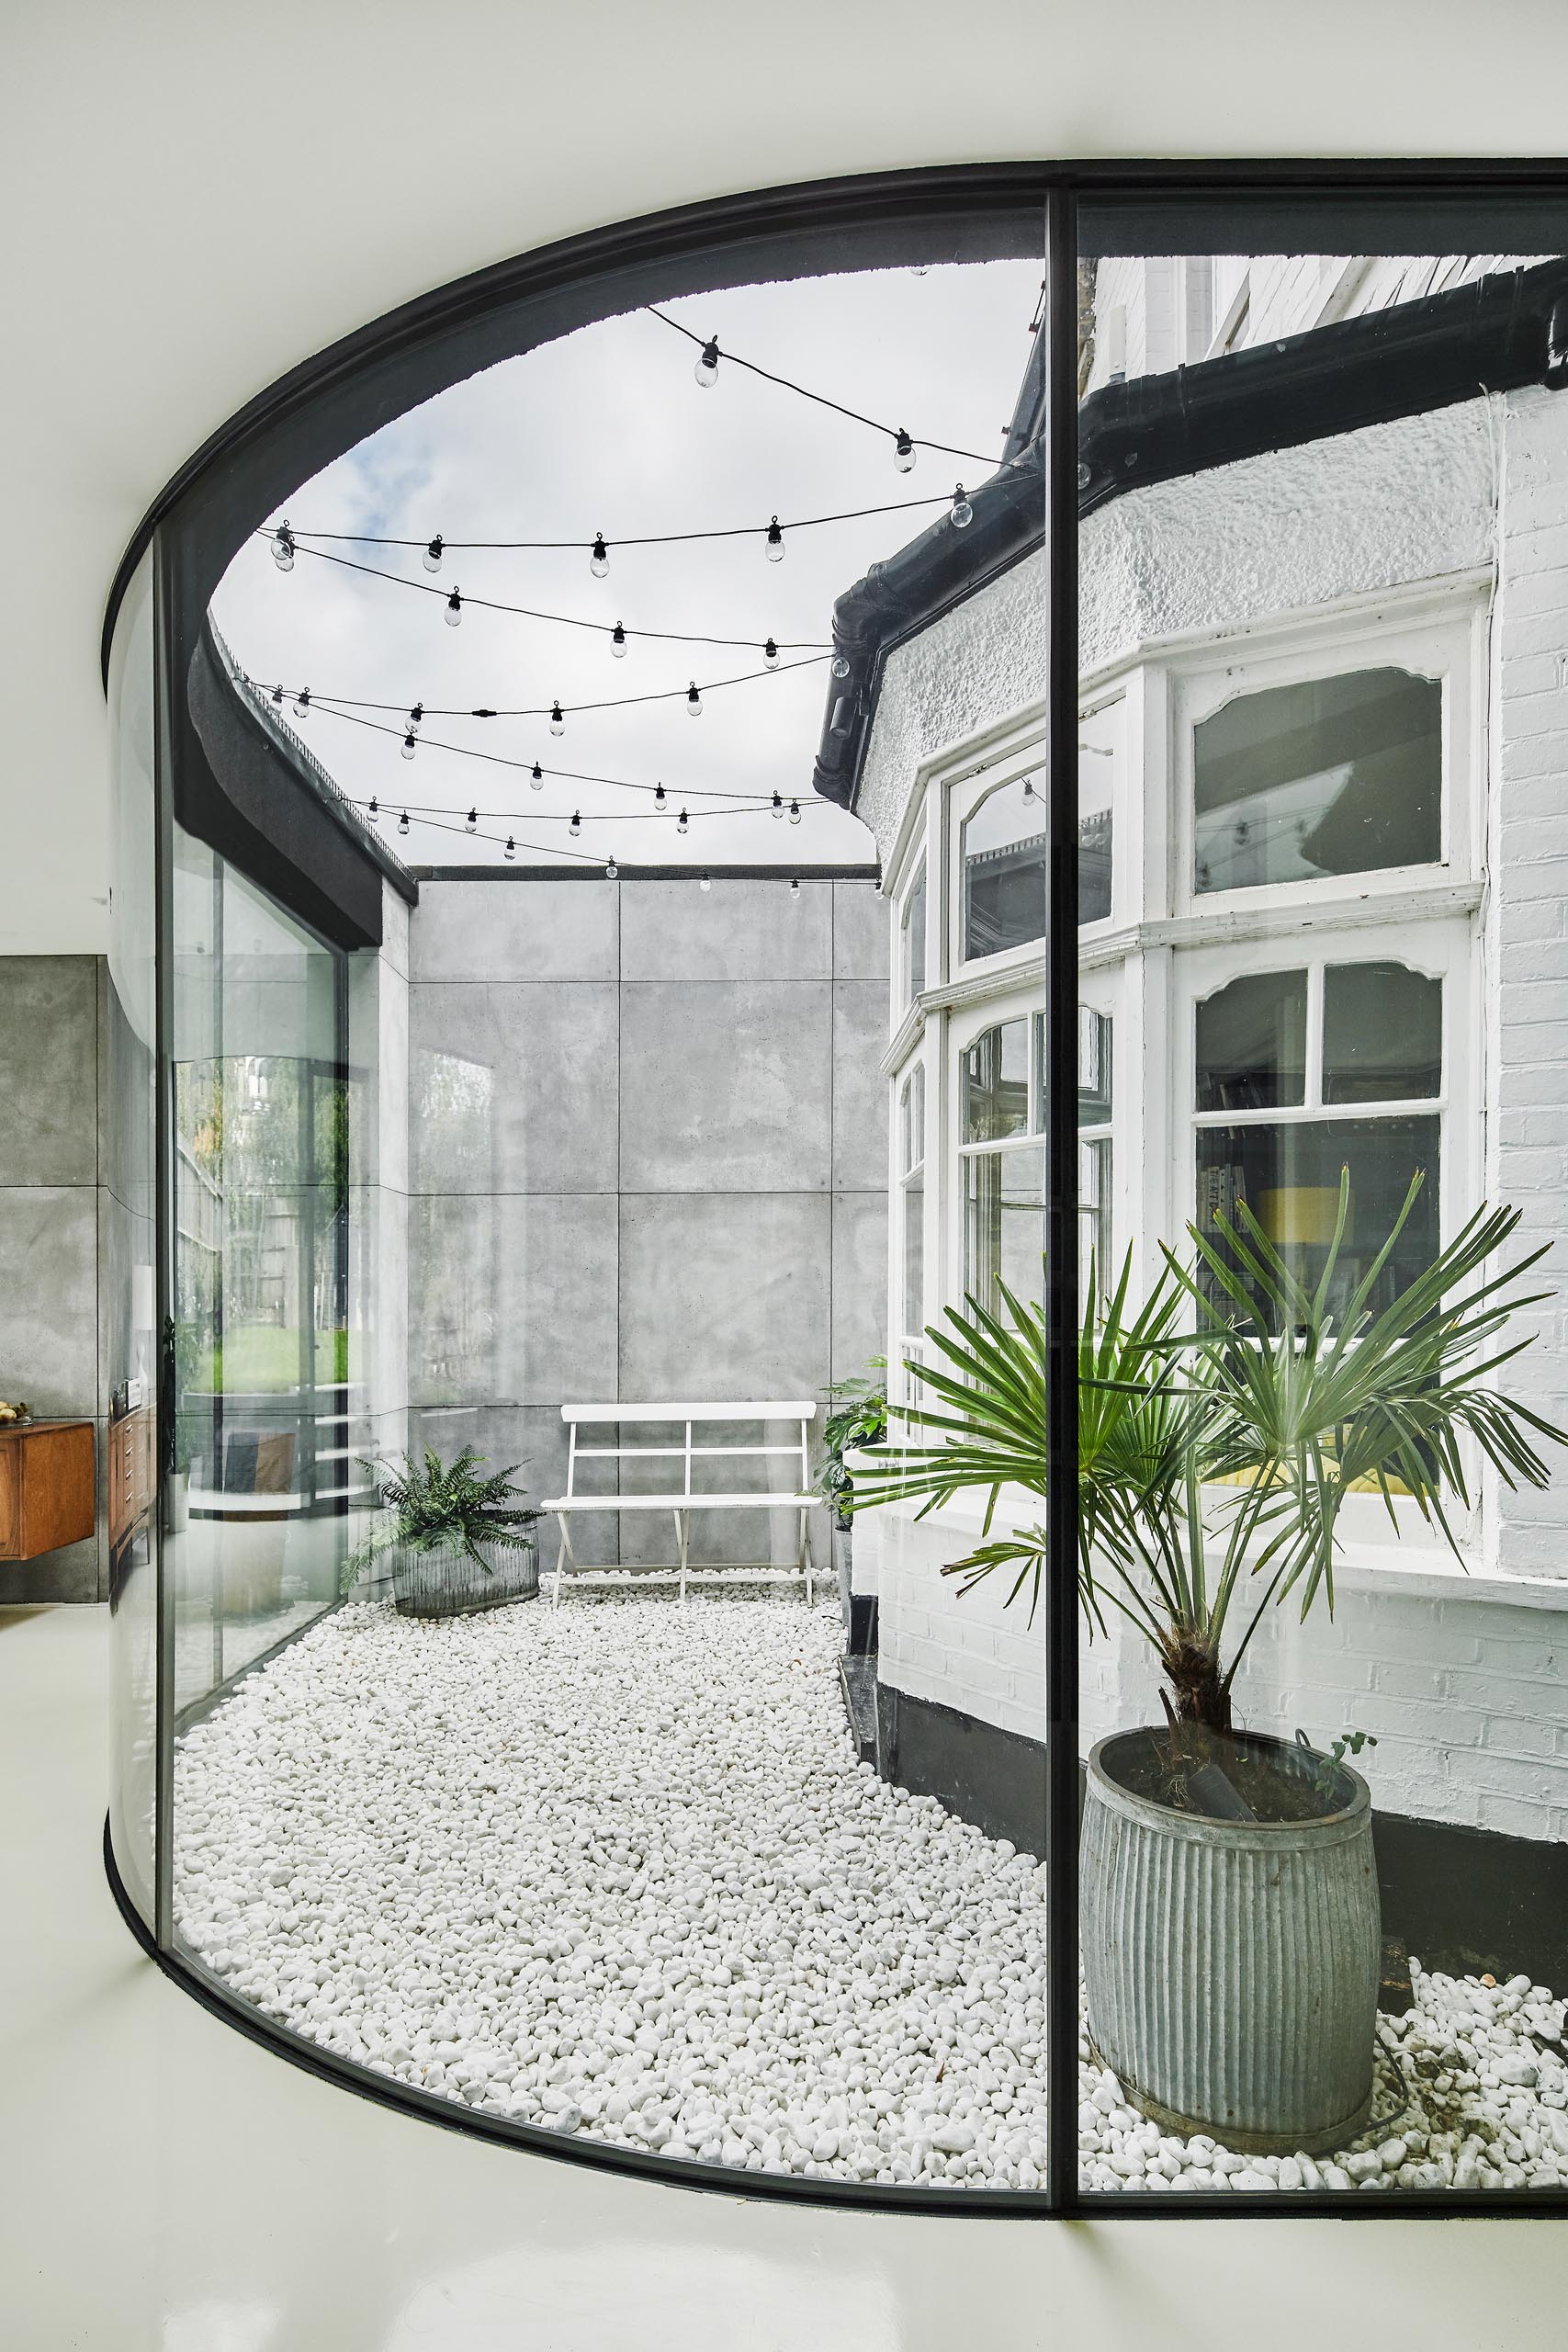 The small open-air courtyard between the bay window and the frameless window can be accessed from within the original home, and includes a white pebble ground cover, some planters, and string lights.